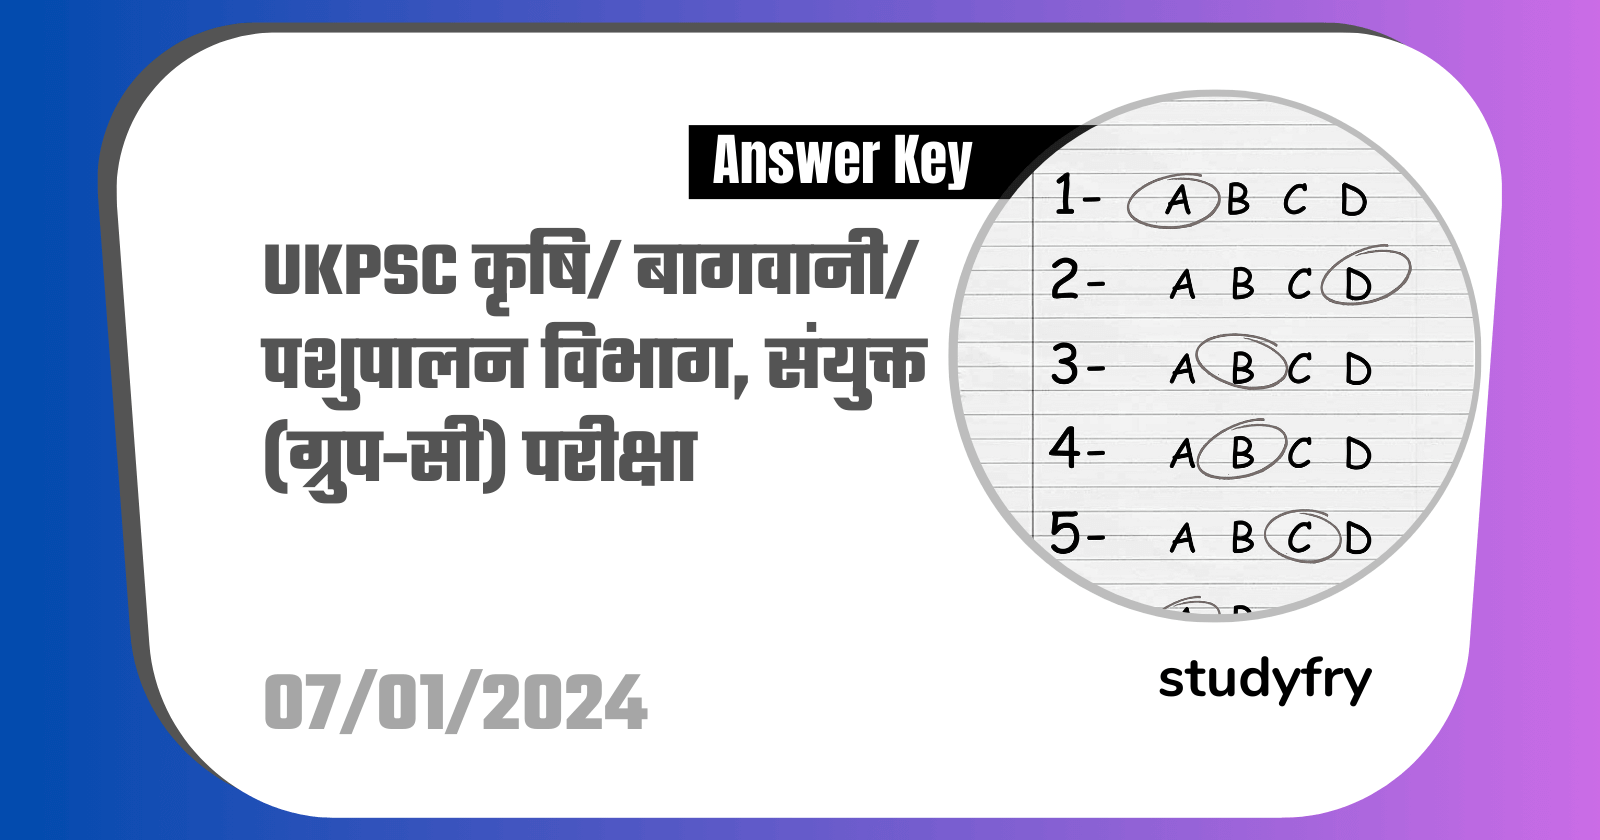 UKPSC Agriculture/Horticulture/Animal Husbandry Department, Combined (Group-C) Exam-2023 Official Answer Key